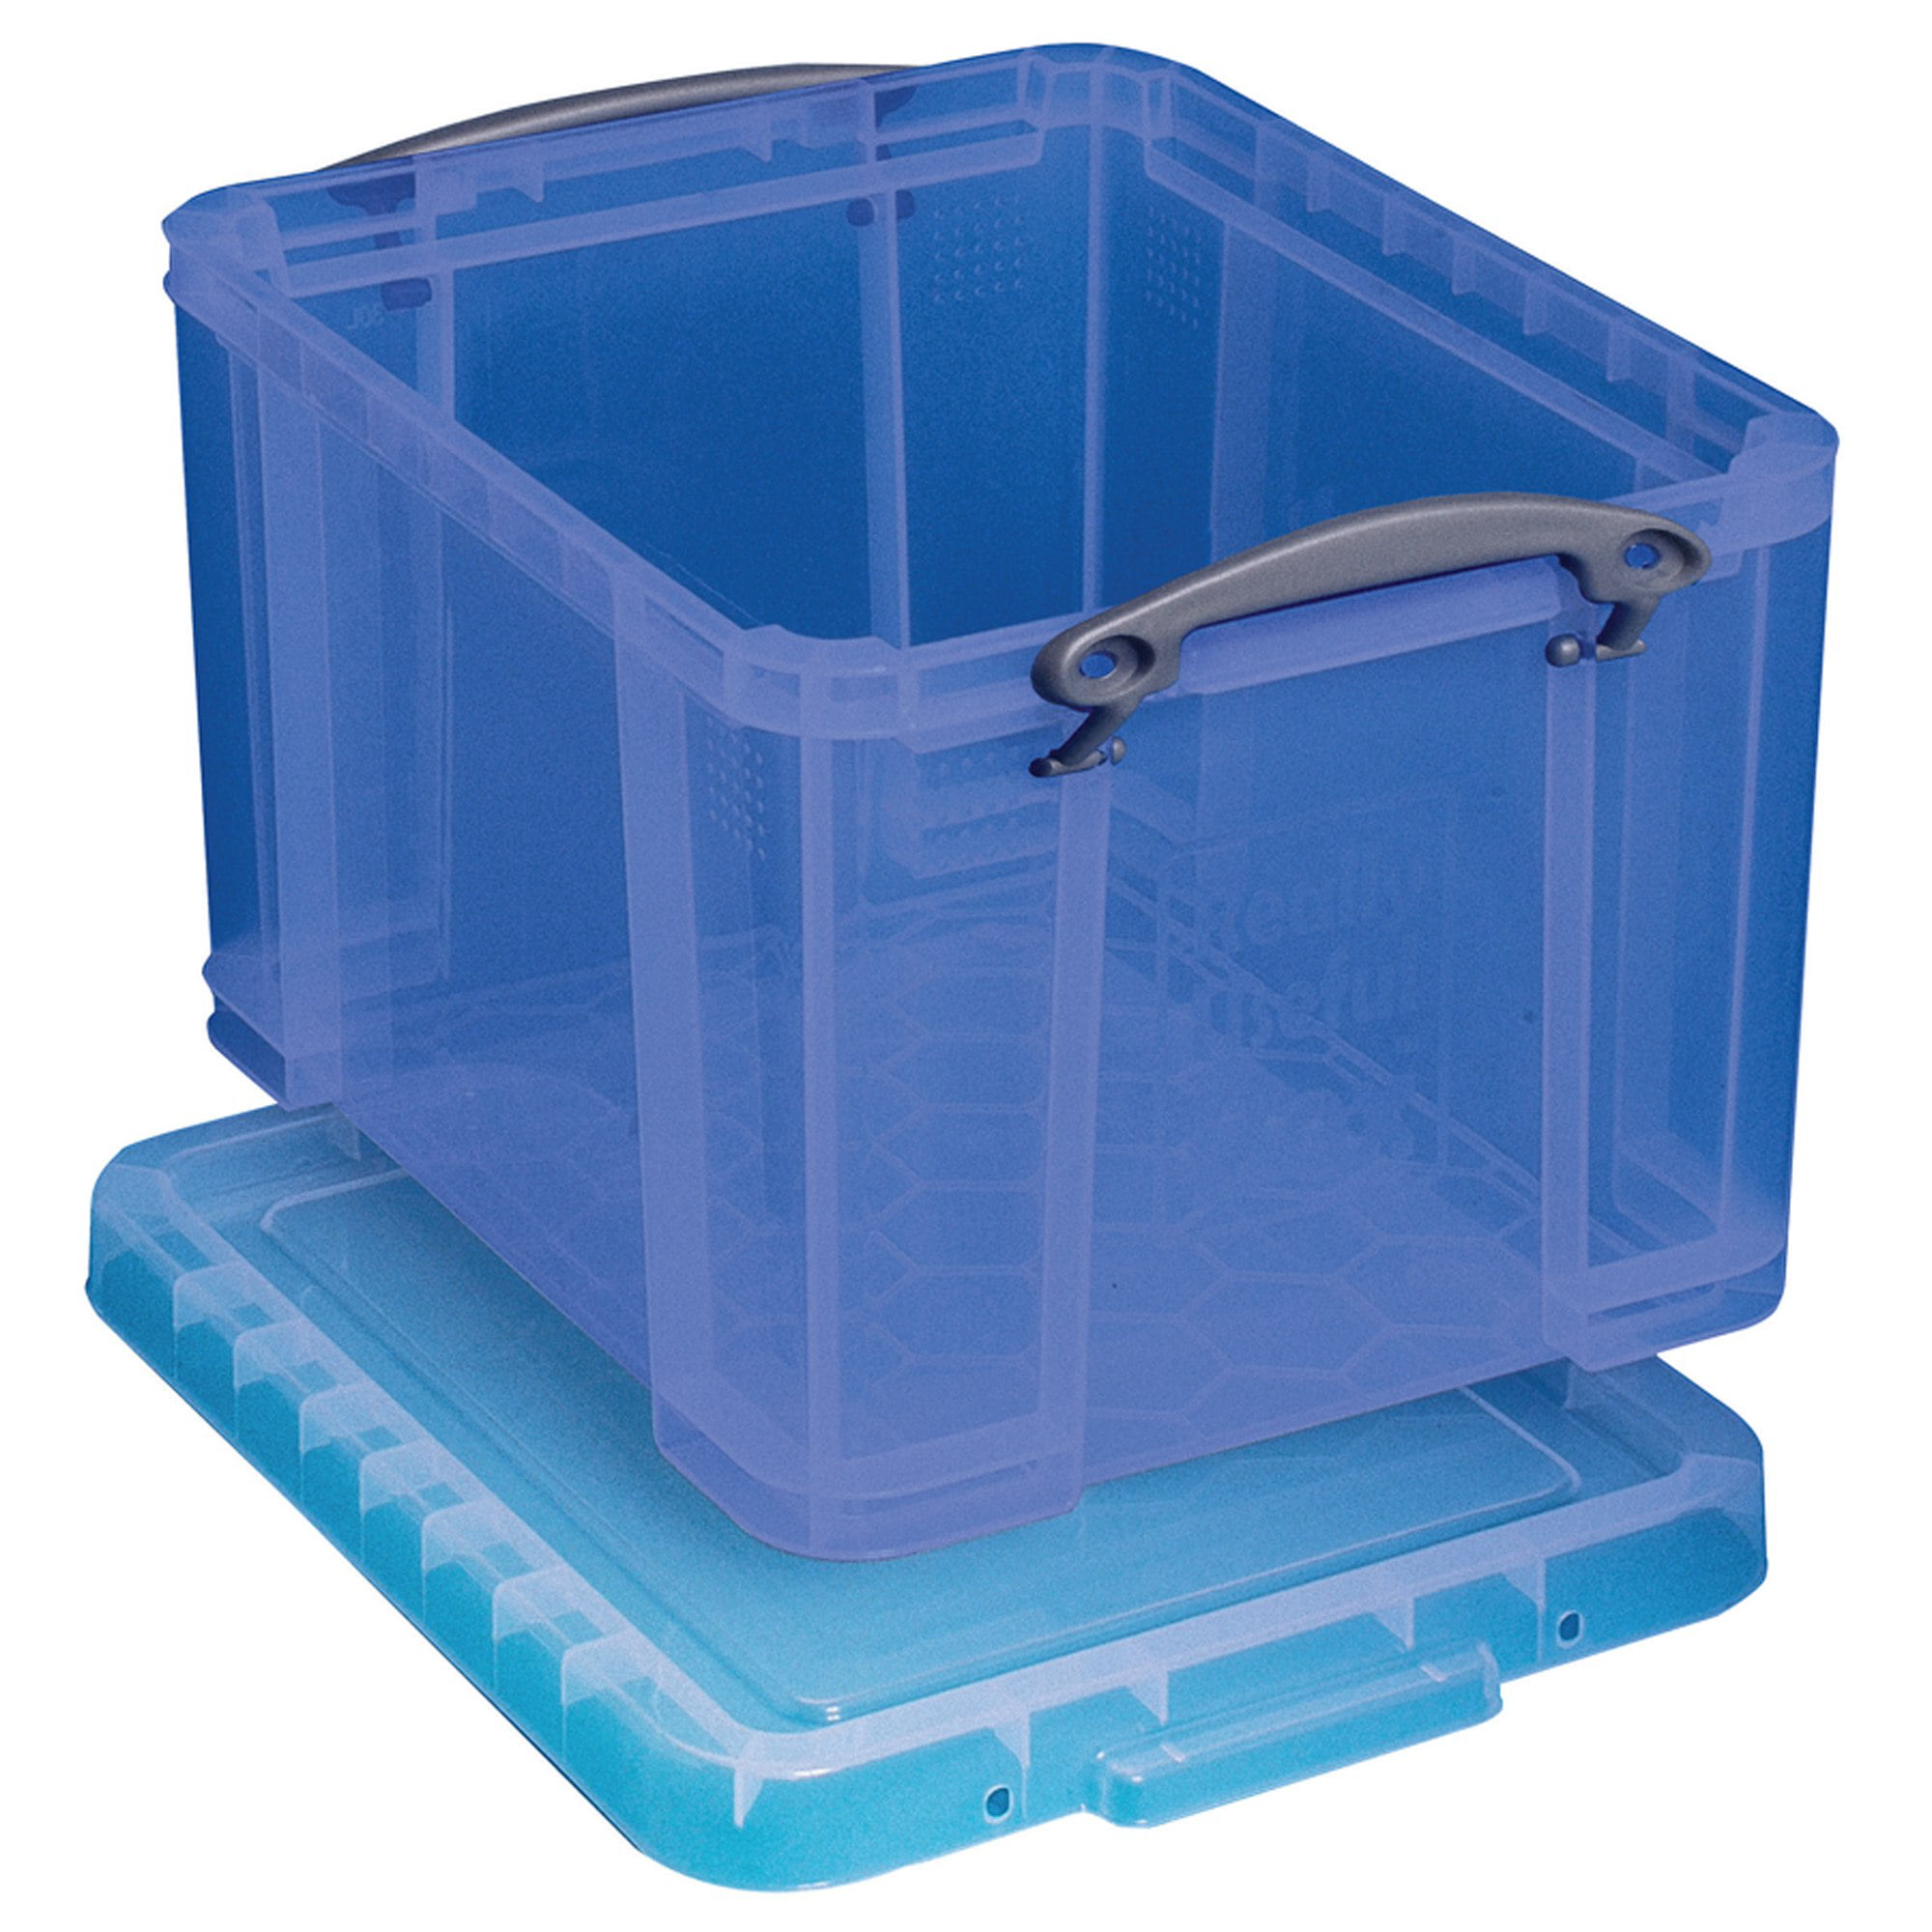 4 x Really Useful 4 Litre Storage Boxes Clear Plastic With Lid 